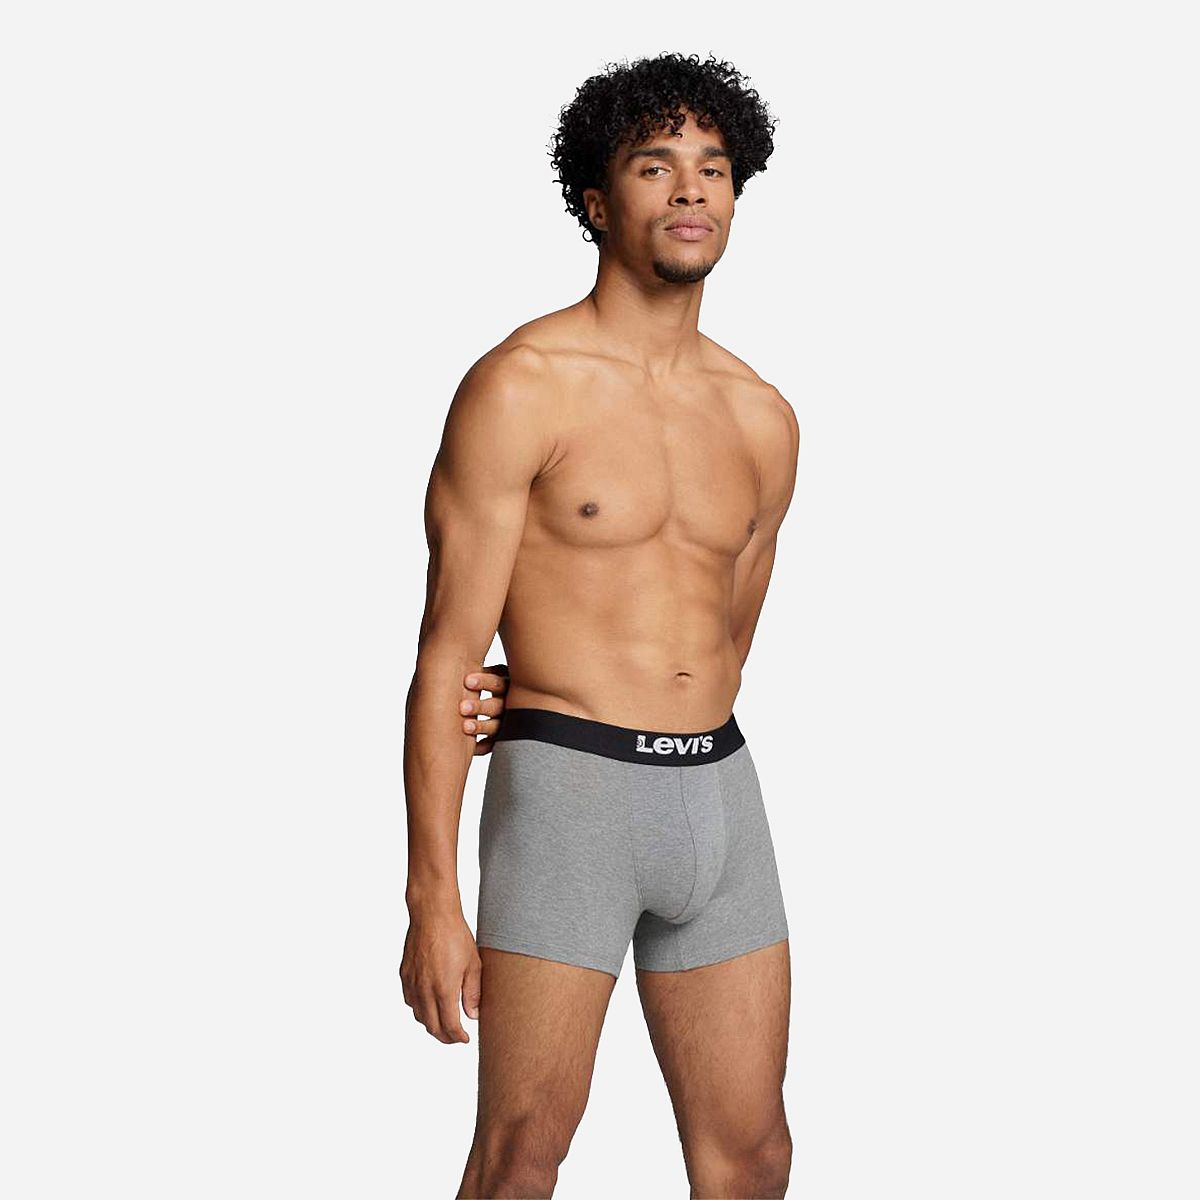 AN298236 Solid Basic Boxer Brief